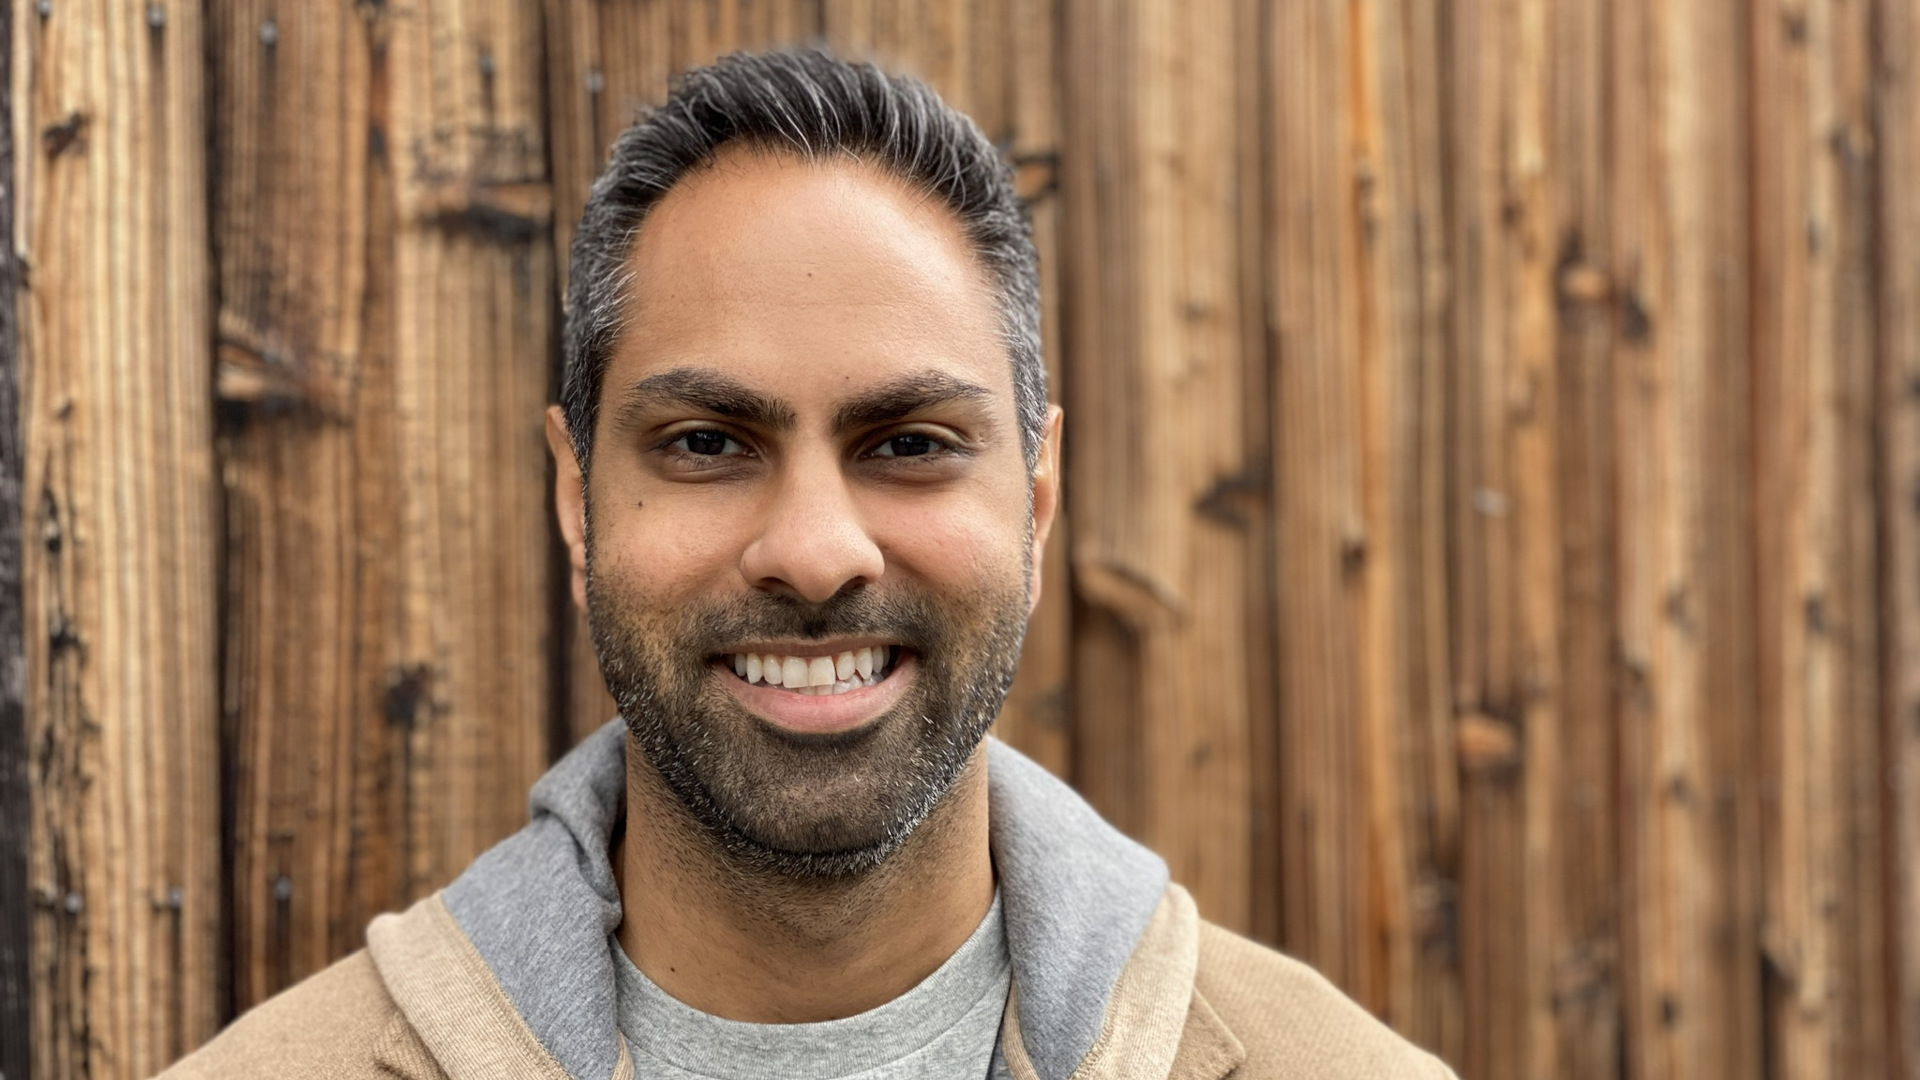 ramit sethi: ‘resumes become job killers’ — 8 steps to make more money (and be happy at work)